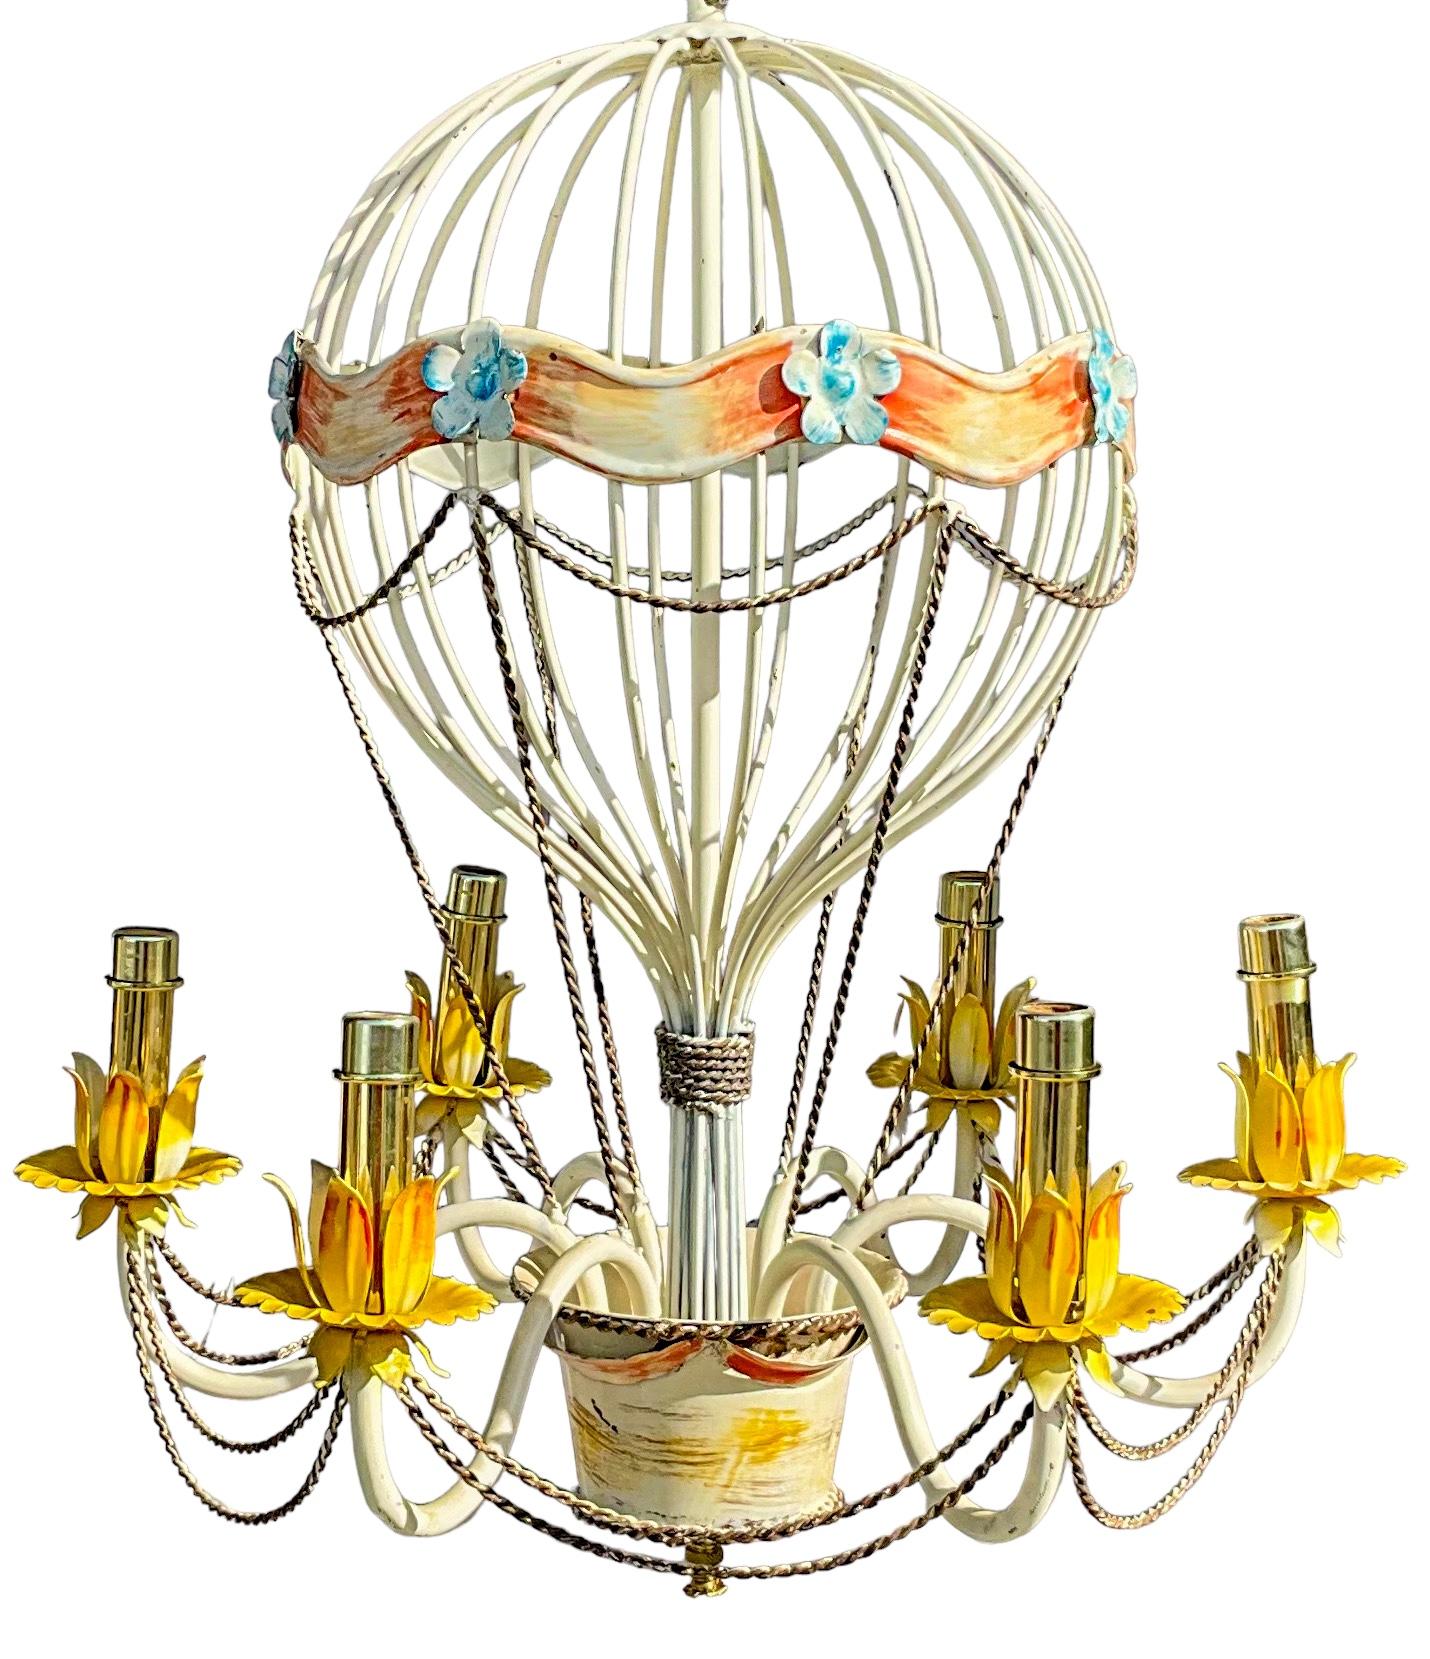 1960s Italian Hot Air Balloon Metal Tole Chandelier W/  French Styling - 6 Arm In Good Condition For Sale In Kennesaw, GA